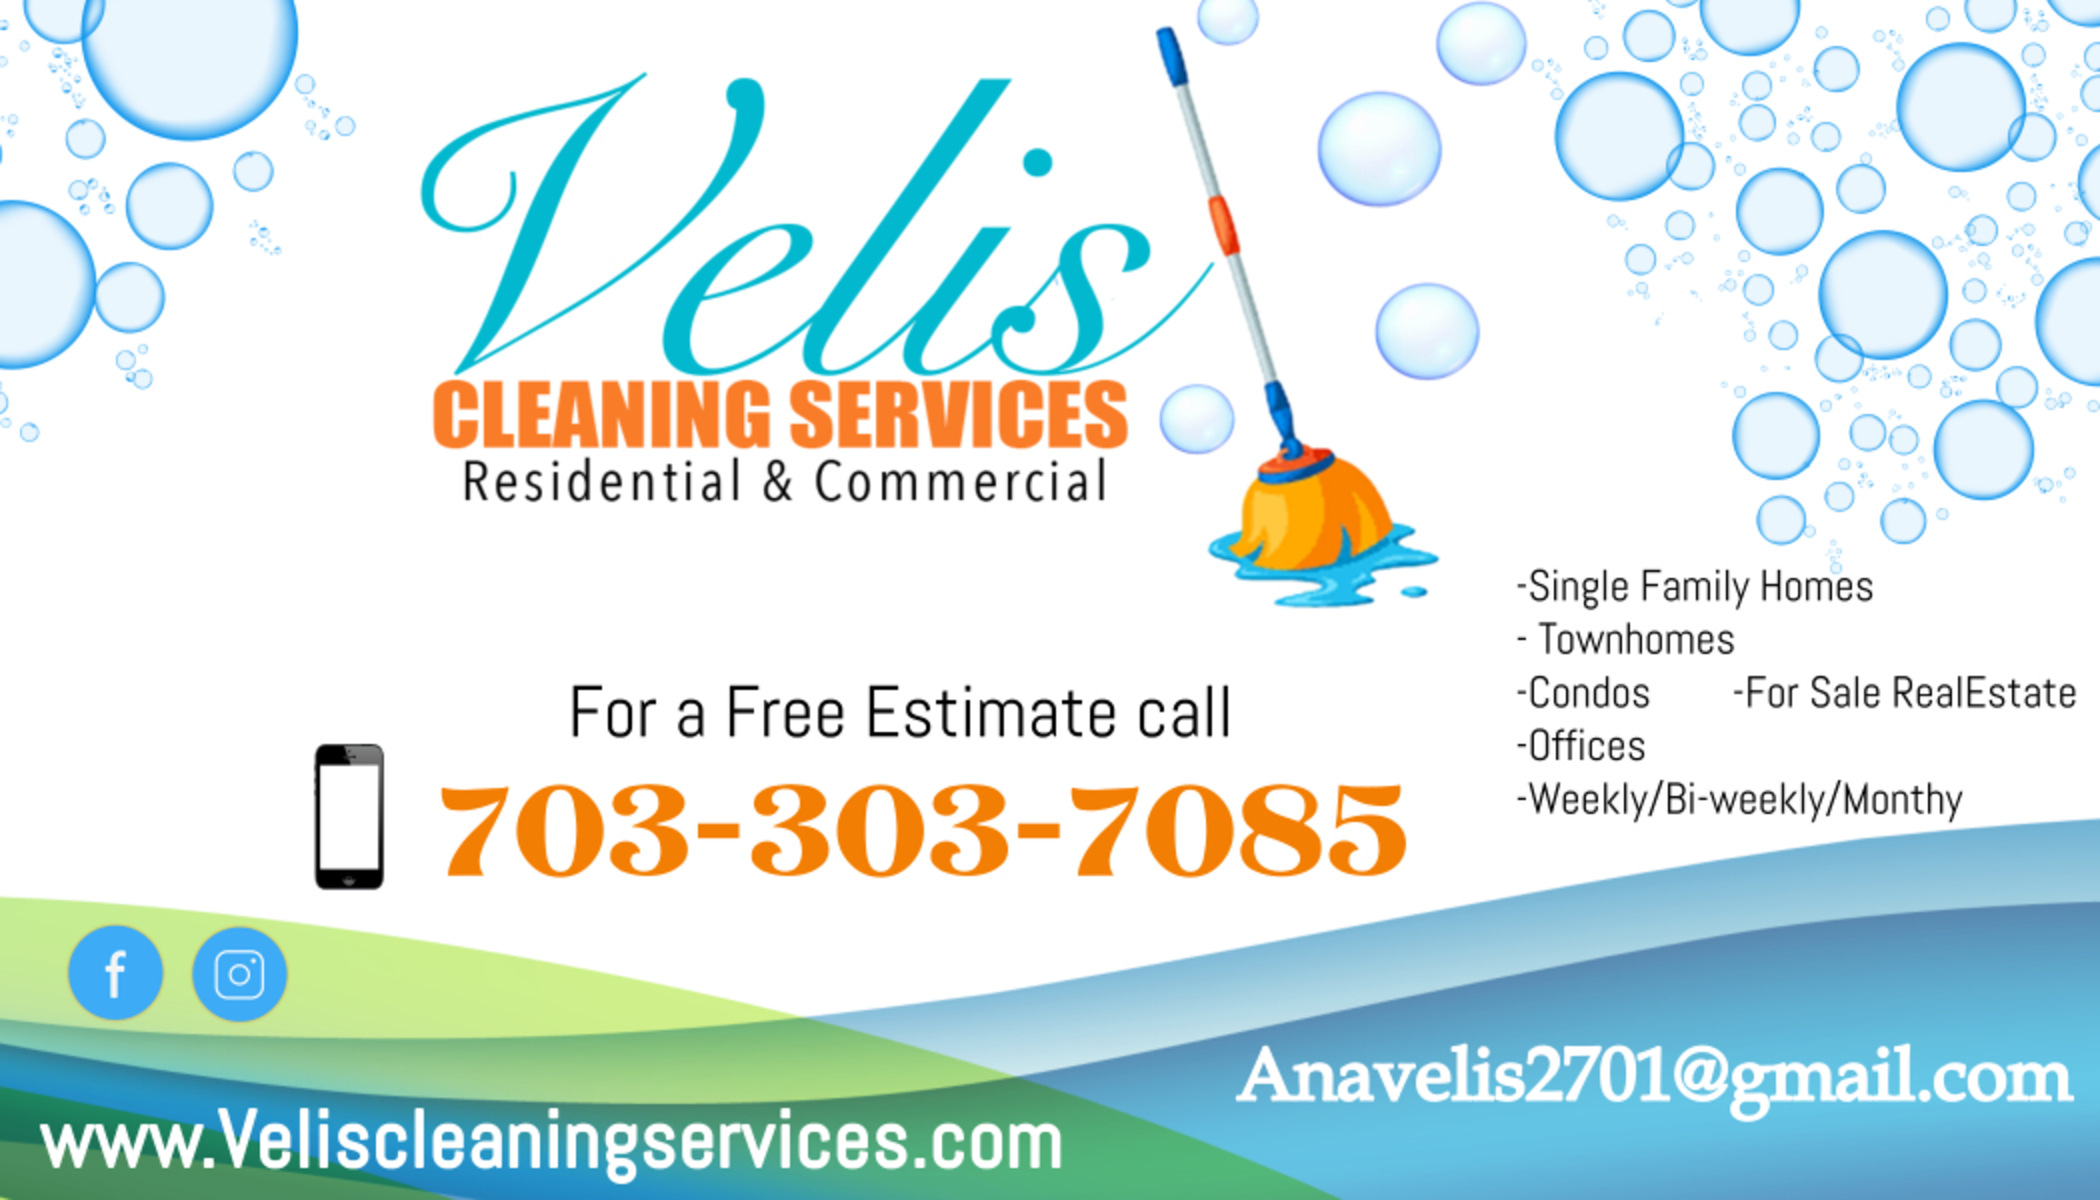 Velis Cleaning Services biz card